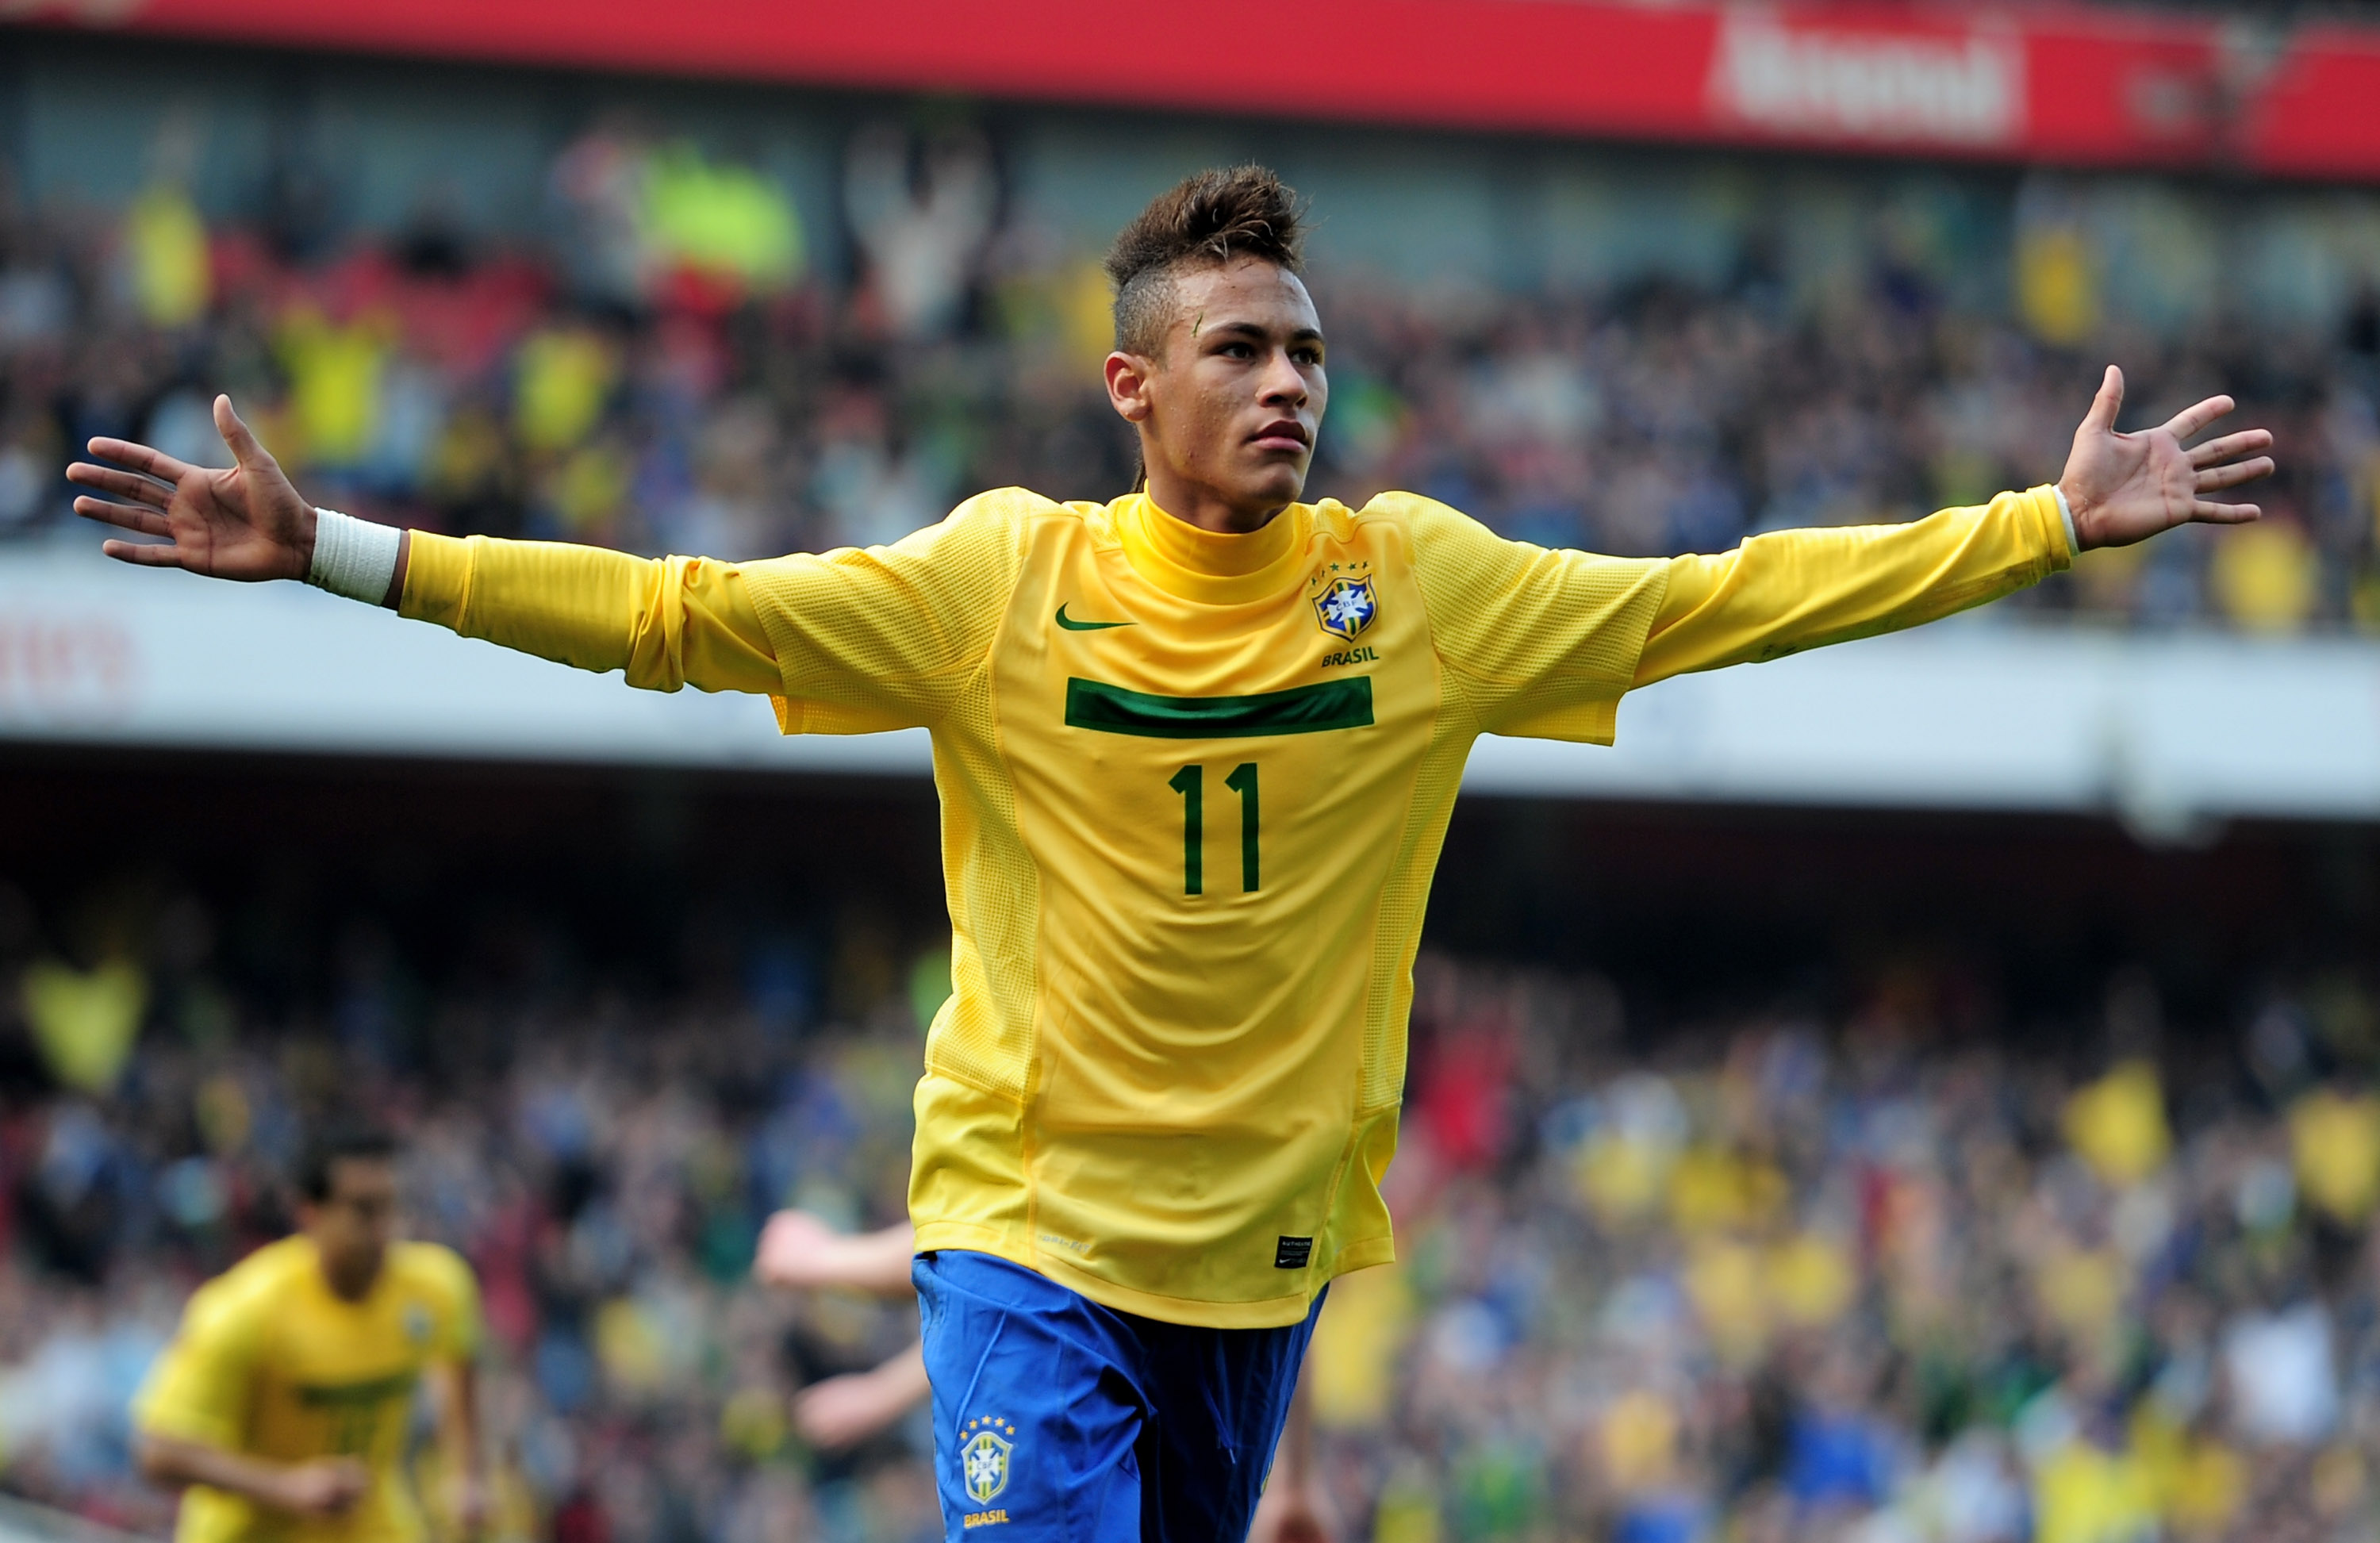 LONDON, ENGLAND - MARCH 27: Neymar of Brazil celebrates scoring the opening goal during the International friendly match between Brazil and Scotland at Emirates Stadium on March 27, 2011 in London, England.  (Photo by Jamie McDonald/Getty Images)